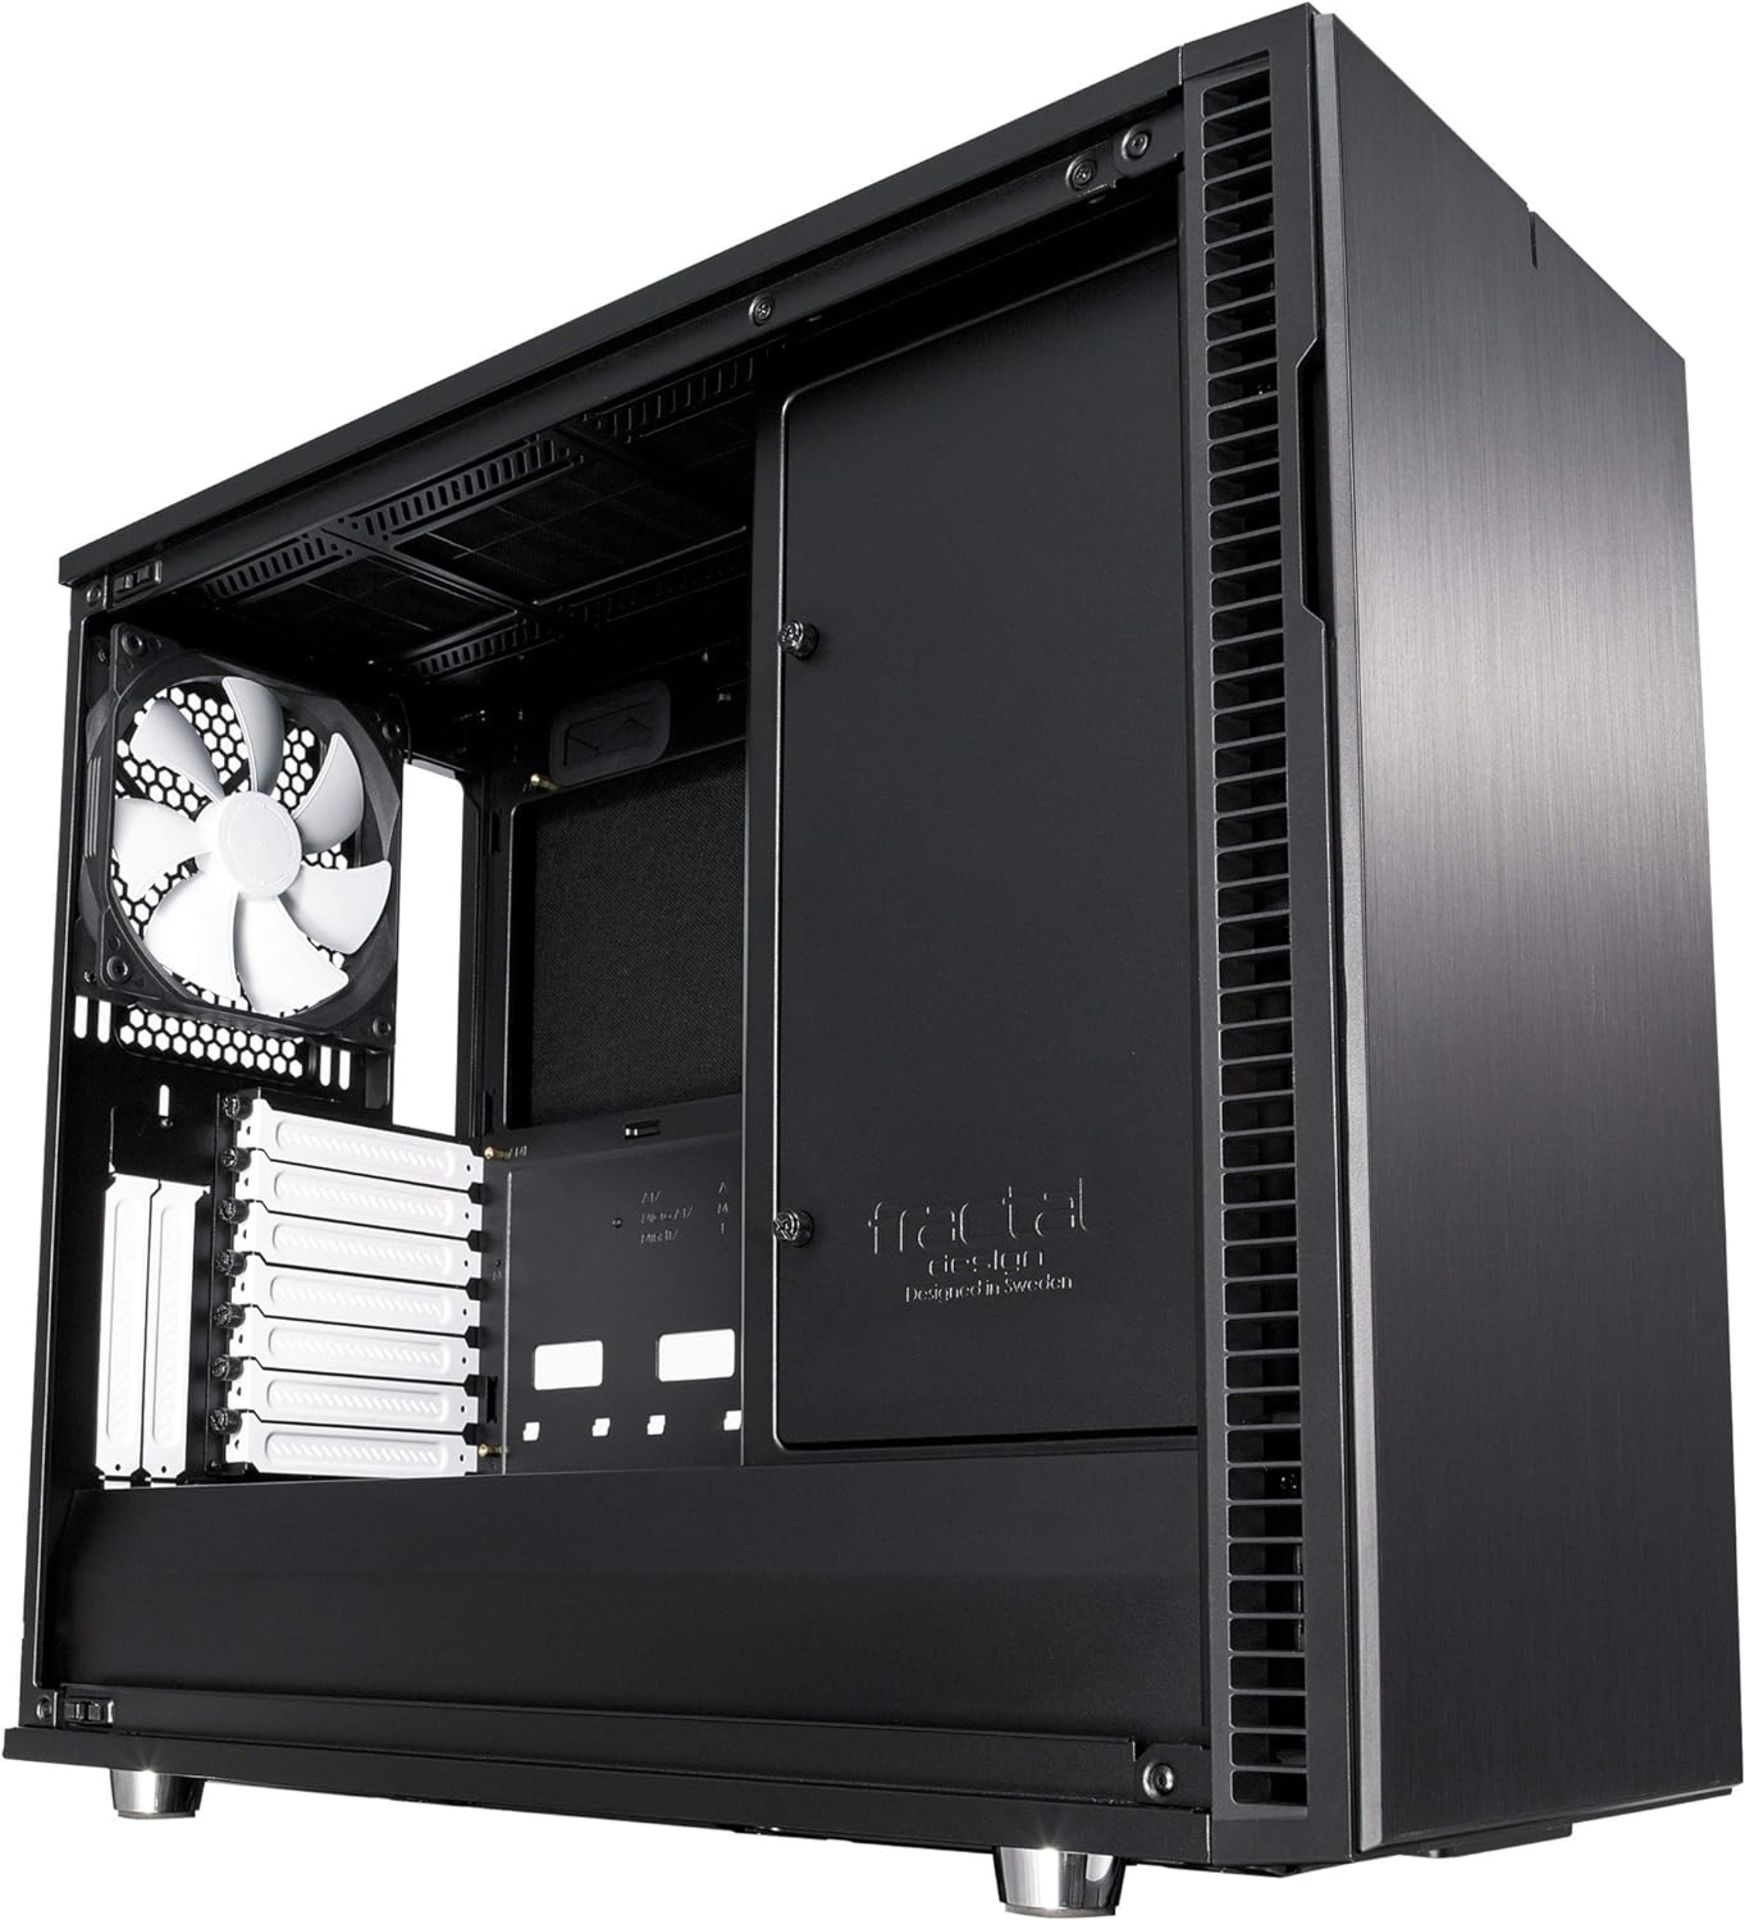 NEW & BOXED FRACTAL DESIGN Define R6 Mid Tower ATX Computer Case- BLACK. RRP £161.94. (R6-7). - Image 3 of 8